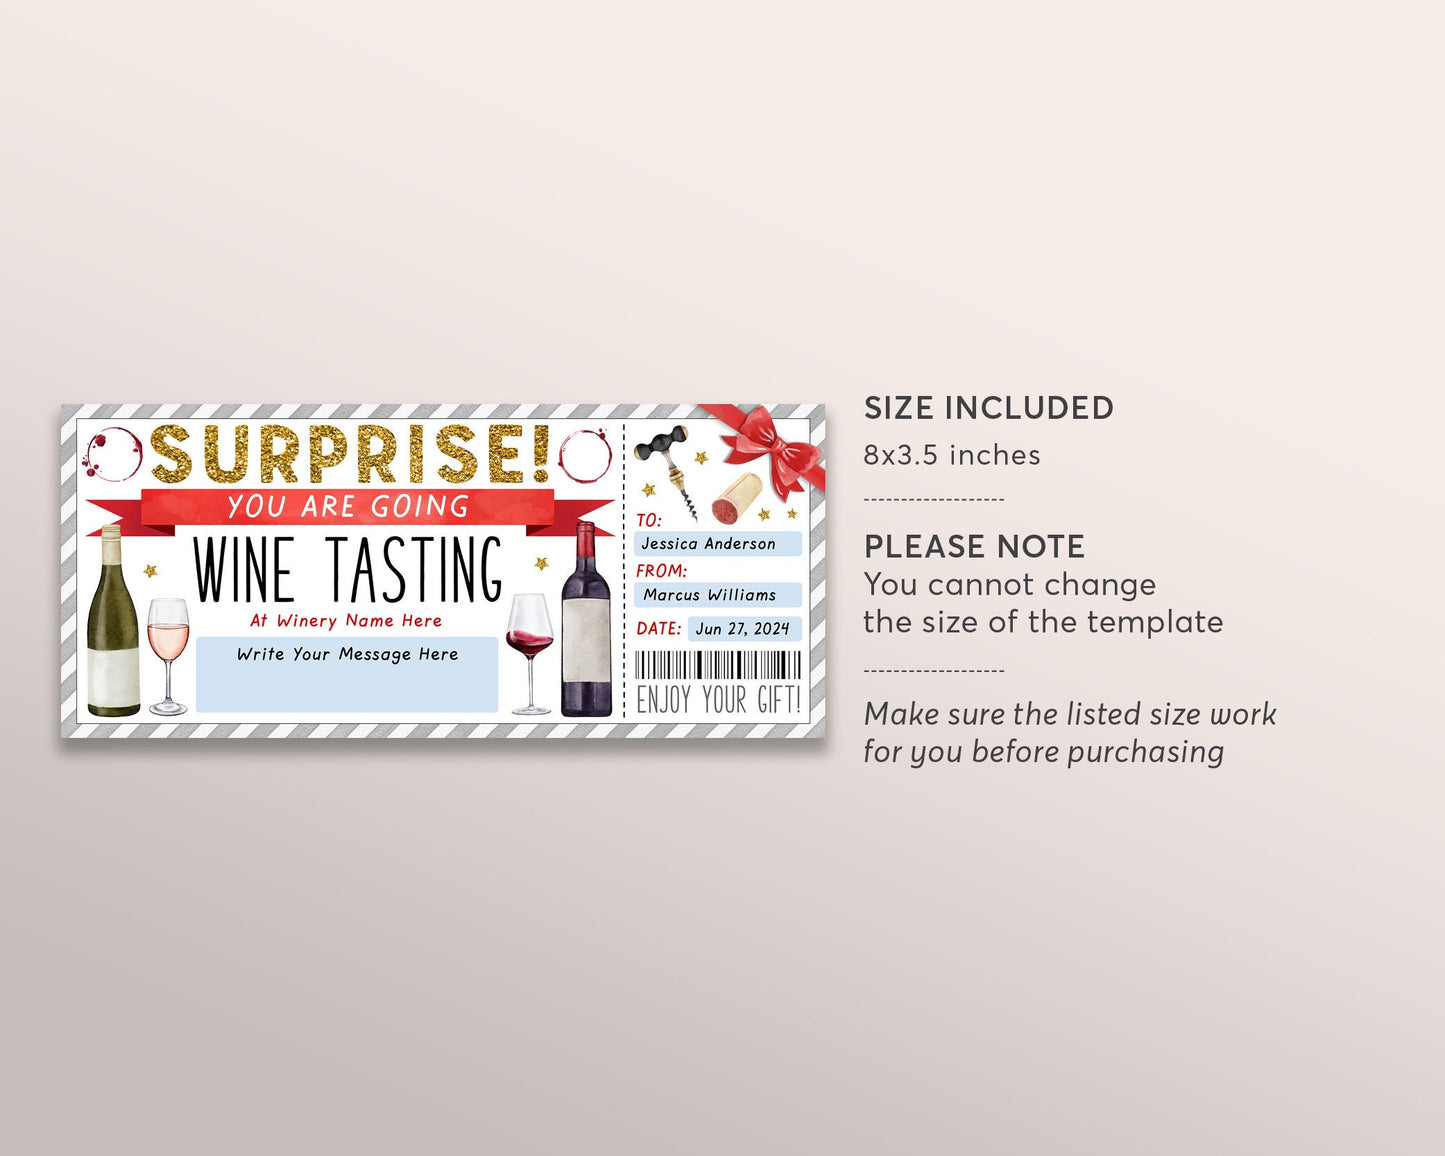 Wine Tasting Gift Voucher Editable Template, Surprise Wine Tasting Ticket Gift Certificate, Winery Vineyard Day Trip Coupon Reveal Printable